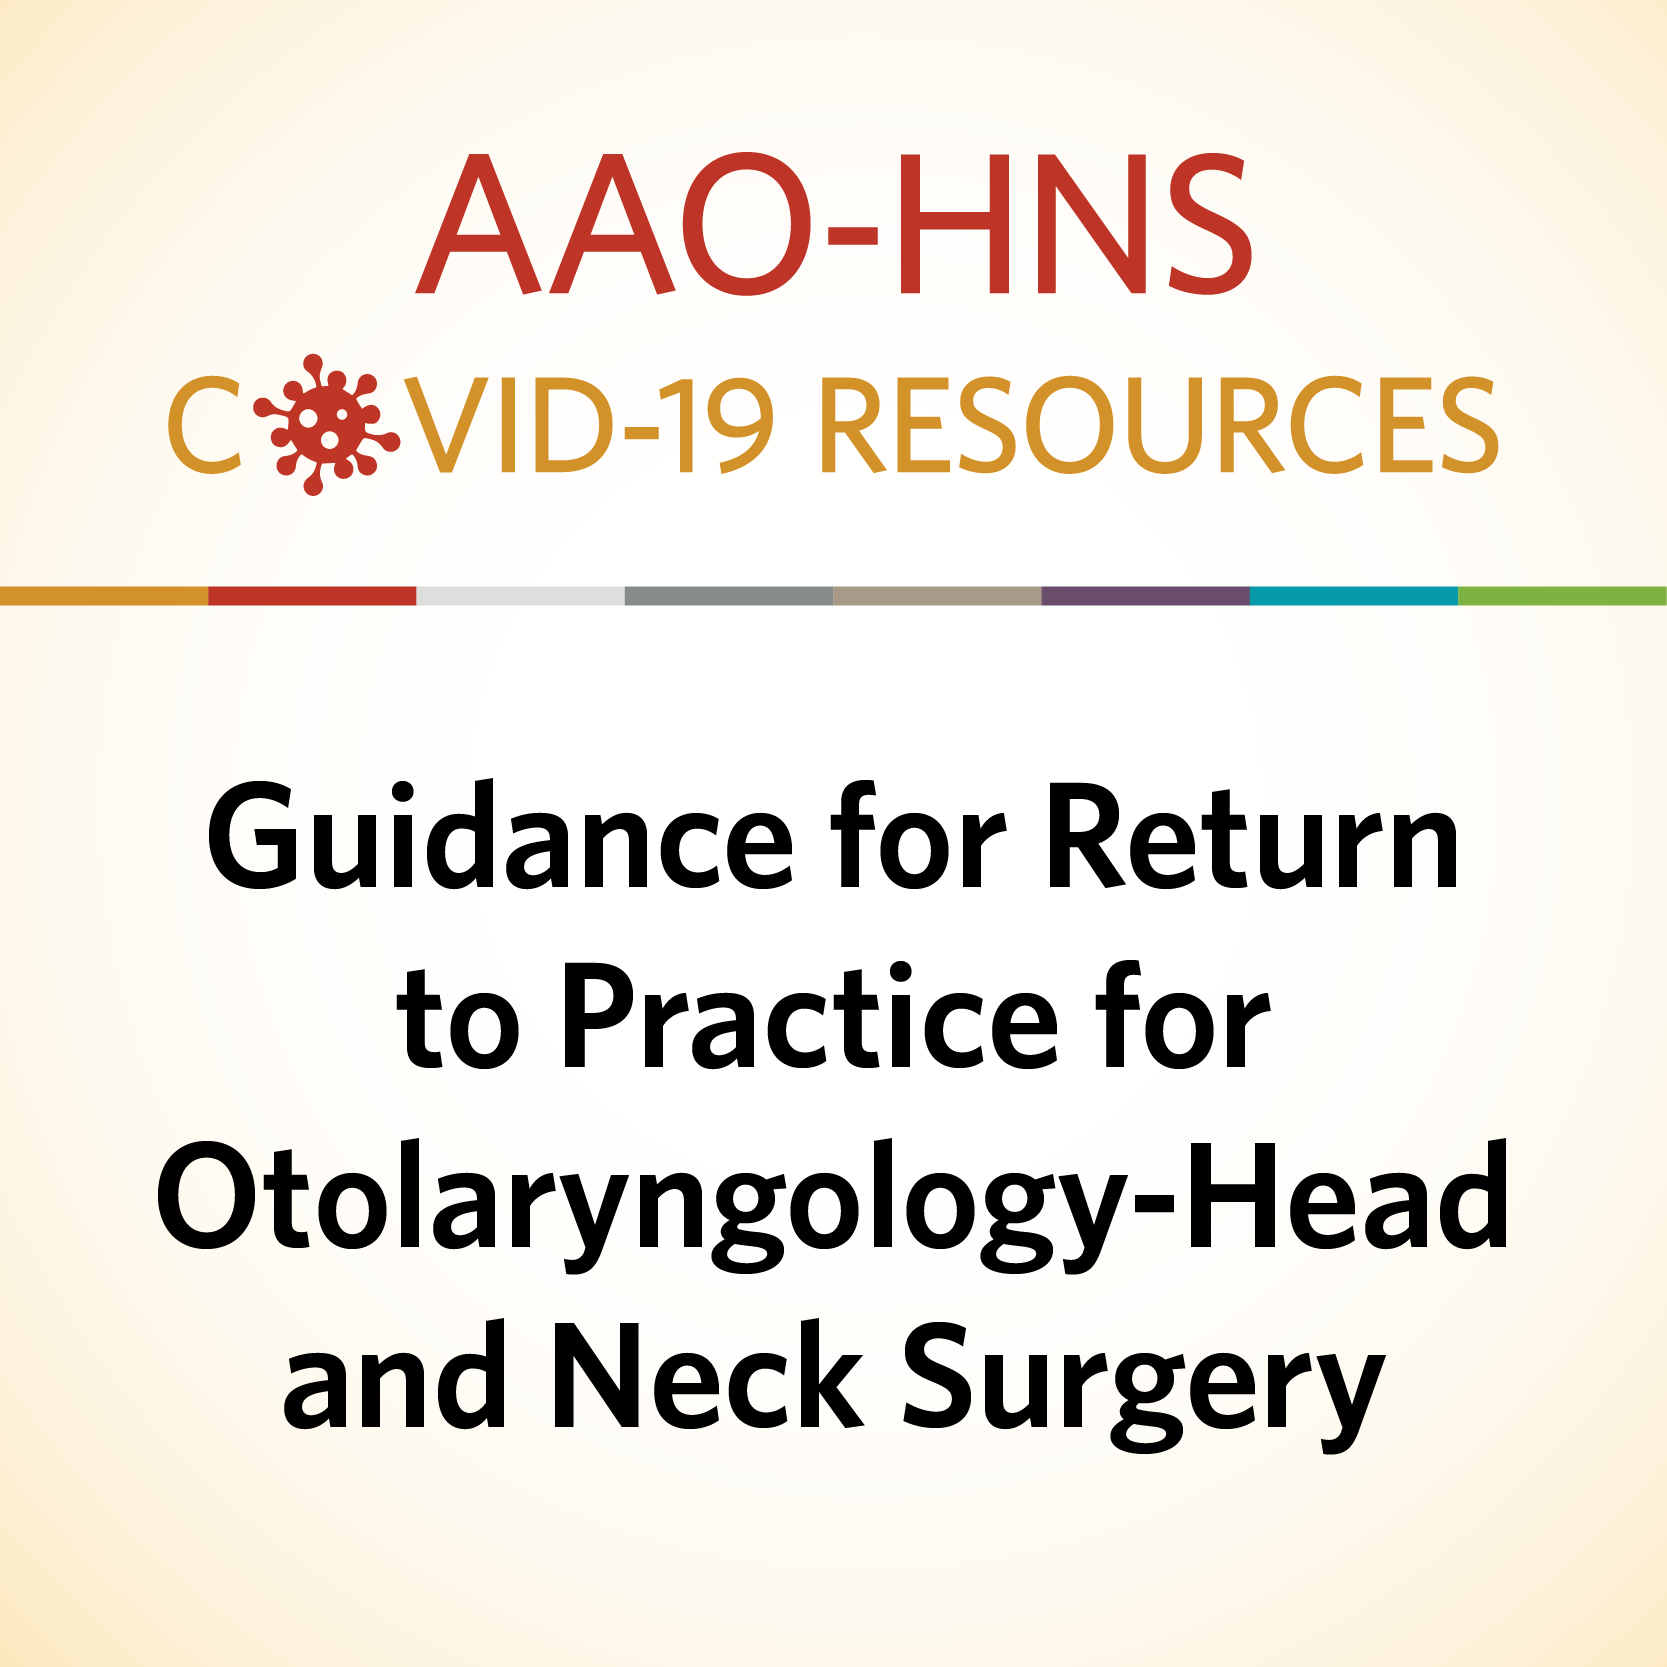 COVID-19 Guidance for Return to Practice for Otolaryngology-Head and Neck Surgery